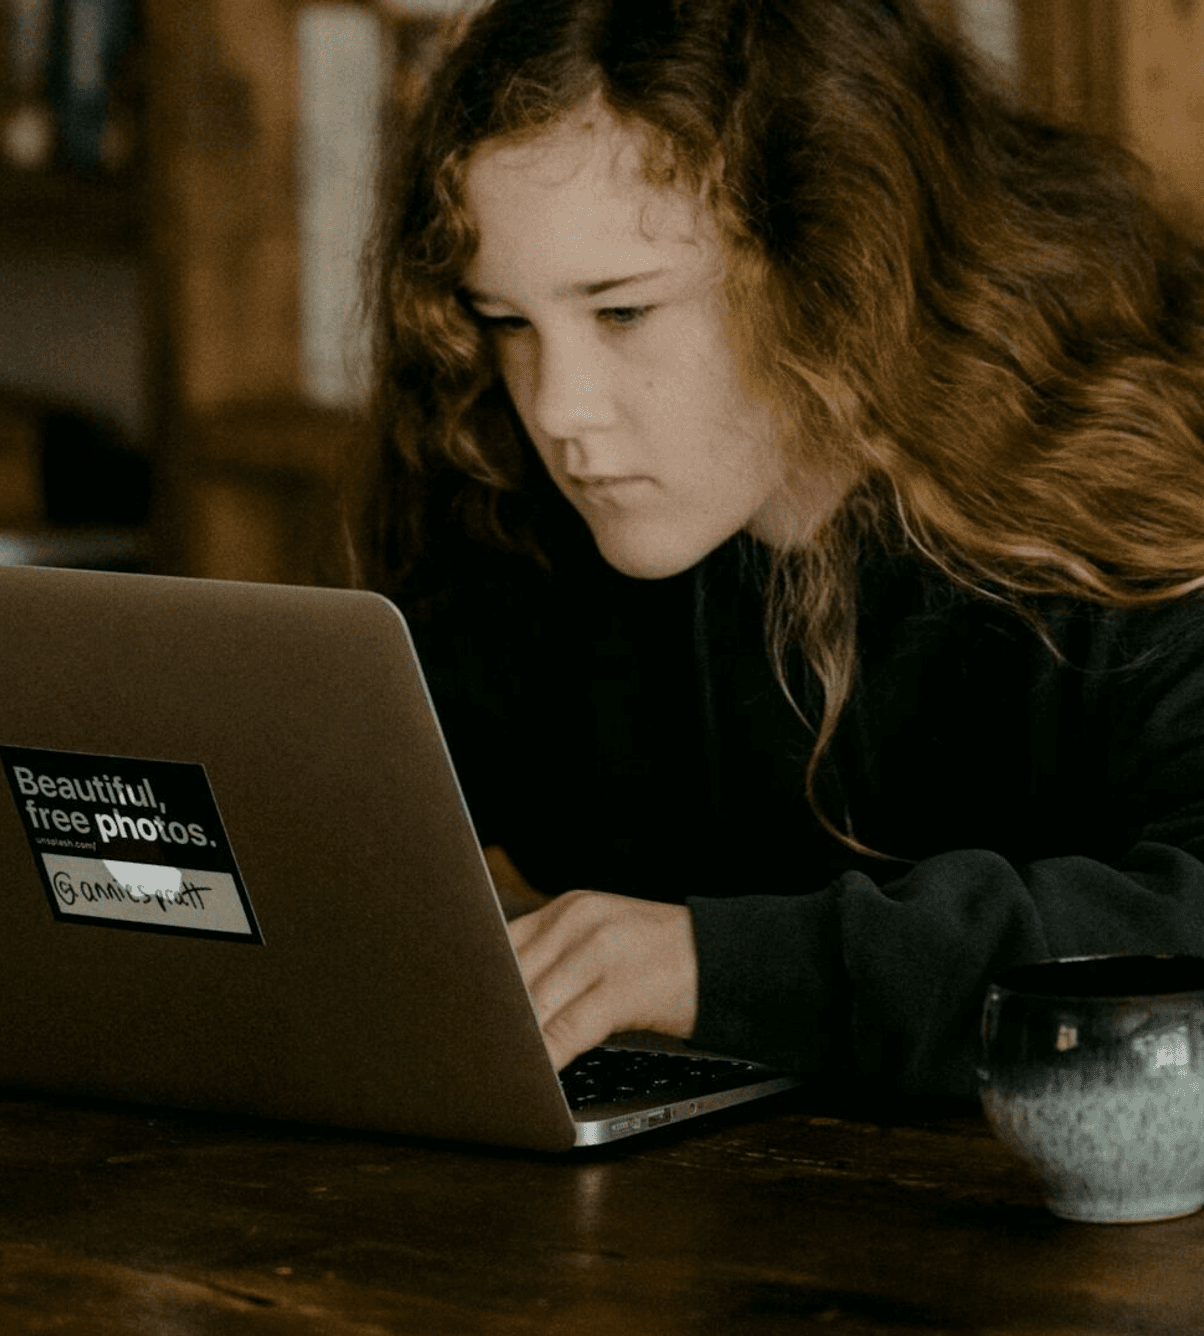 Young girl working with a computer